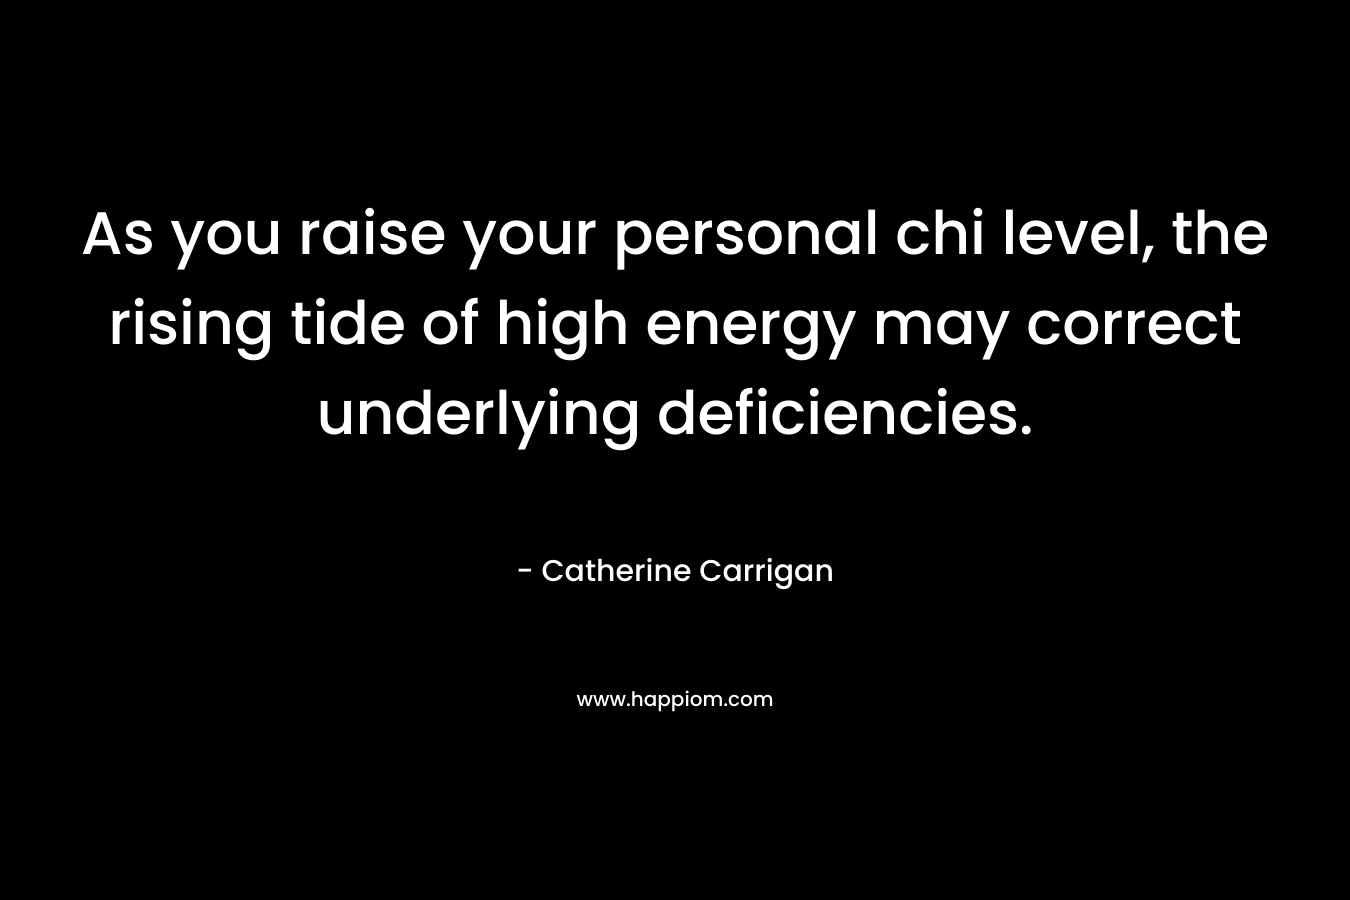 As you raise your personal chi level, the rising tide of high energy may correct underlying deficiencies.